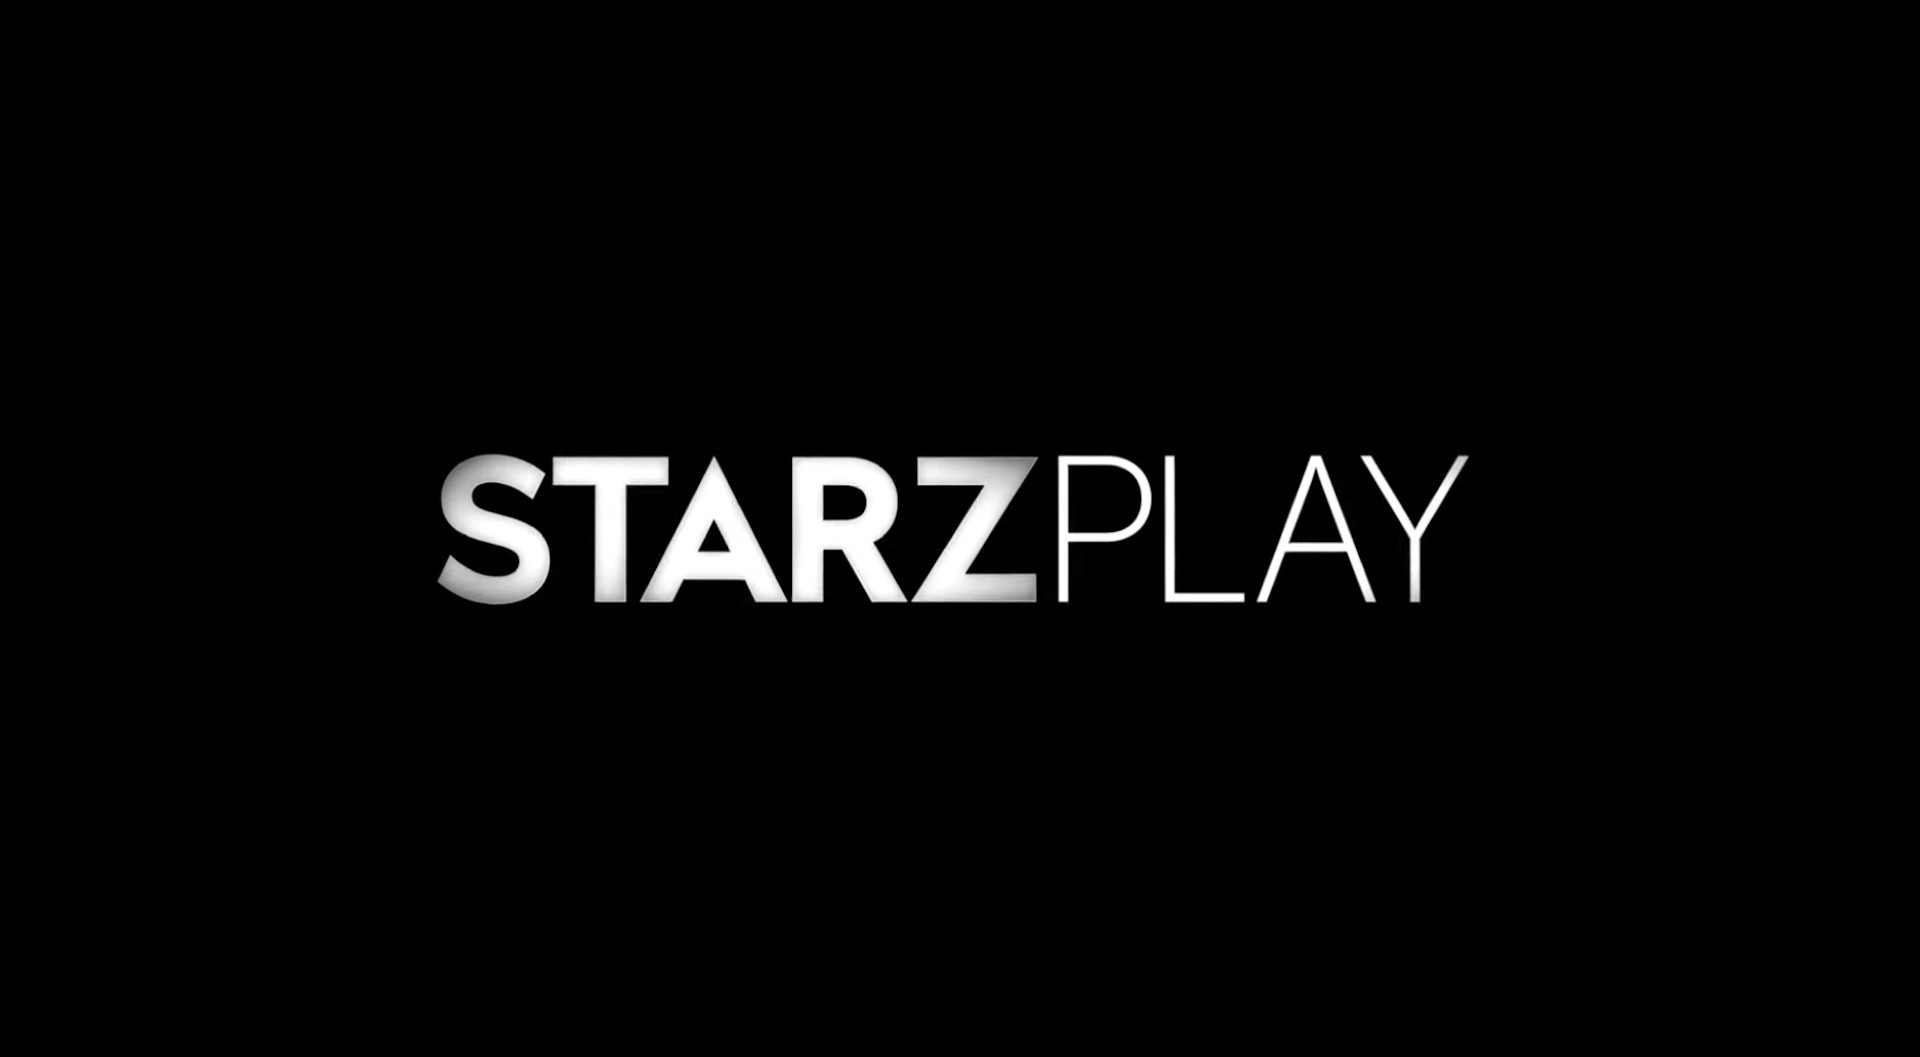 SKY and DirecTV GO customers will now be able to purchase Starzplay's exclusive plan